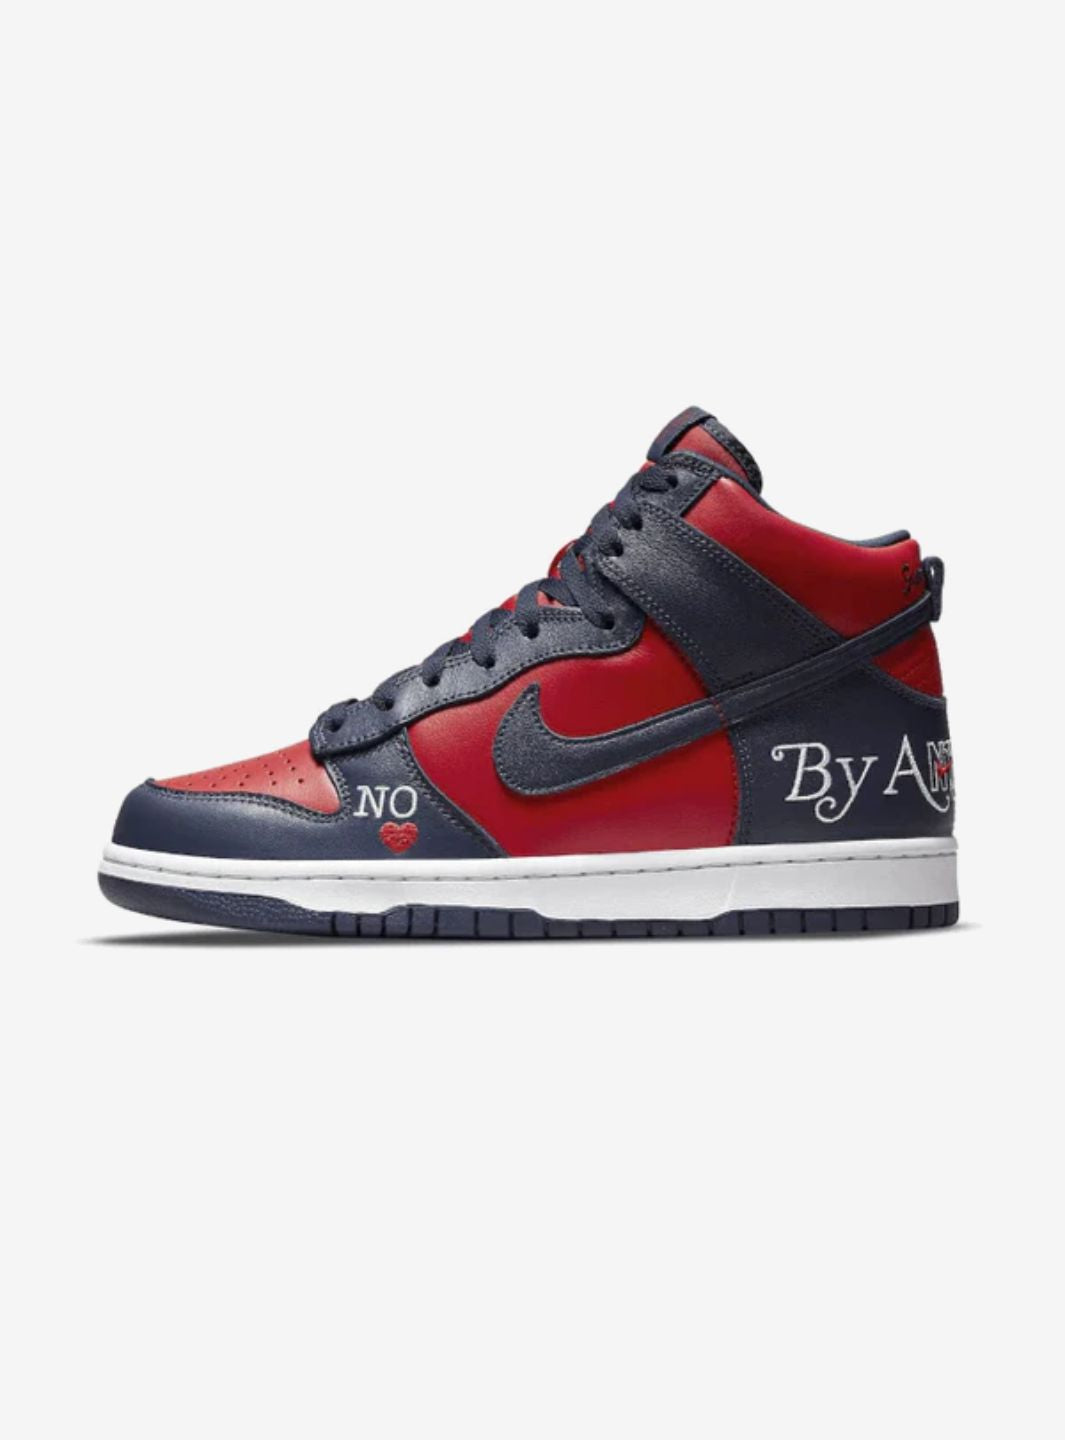 Nike SB Dunk High Supreme By Any Means Navy - DN3741-600 | ResellZone